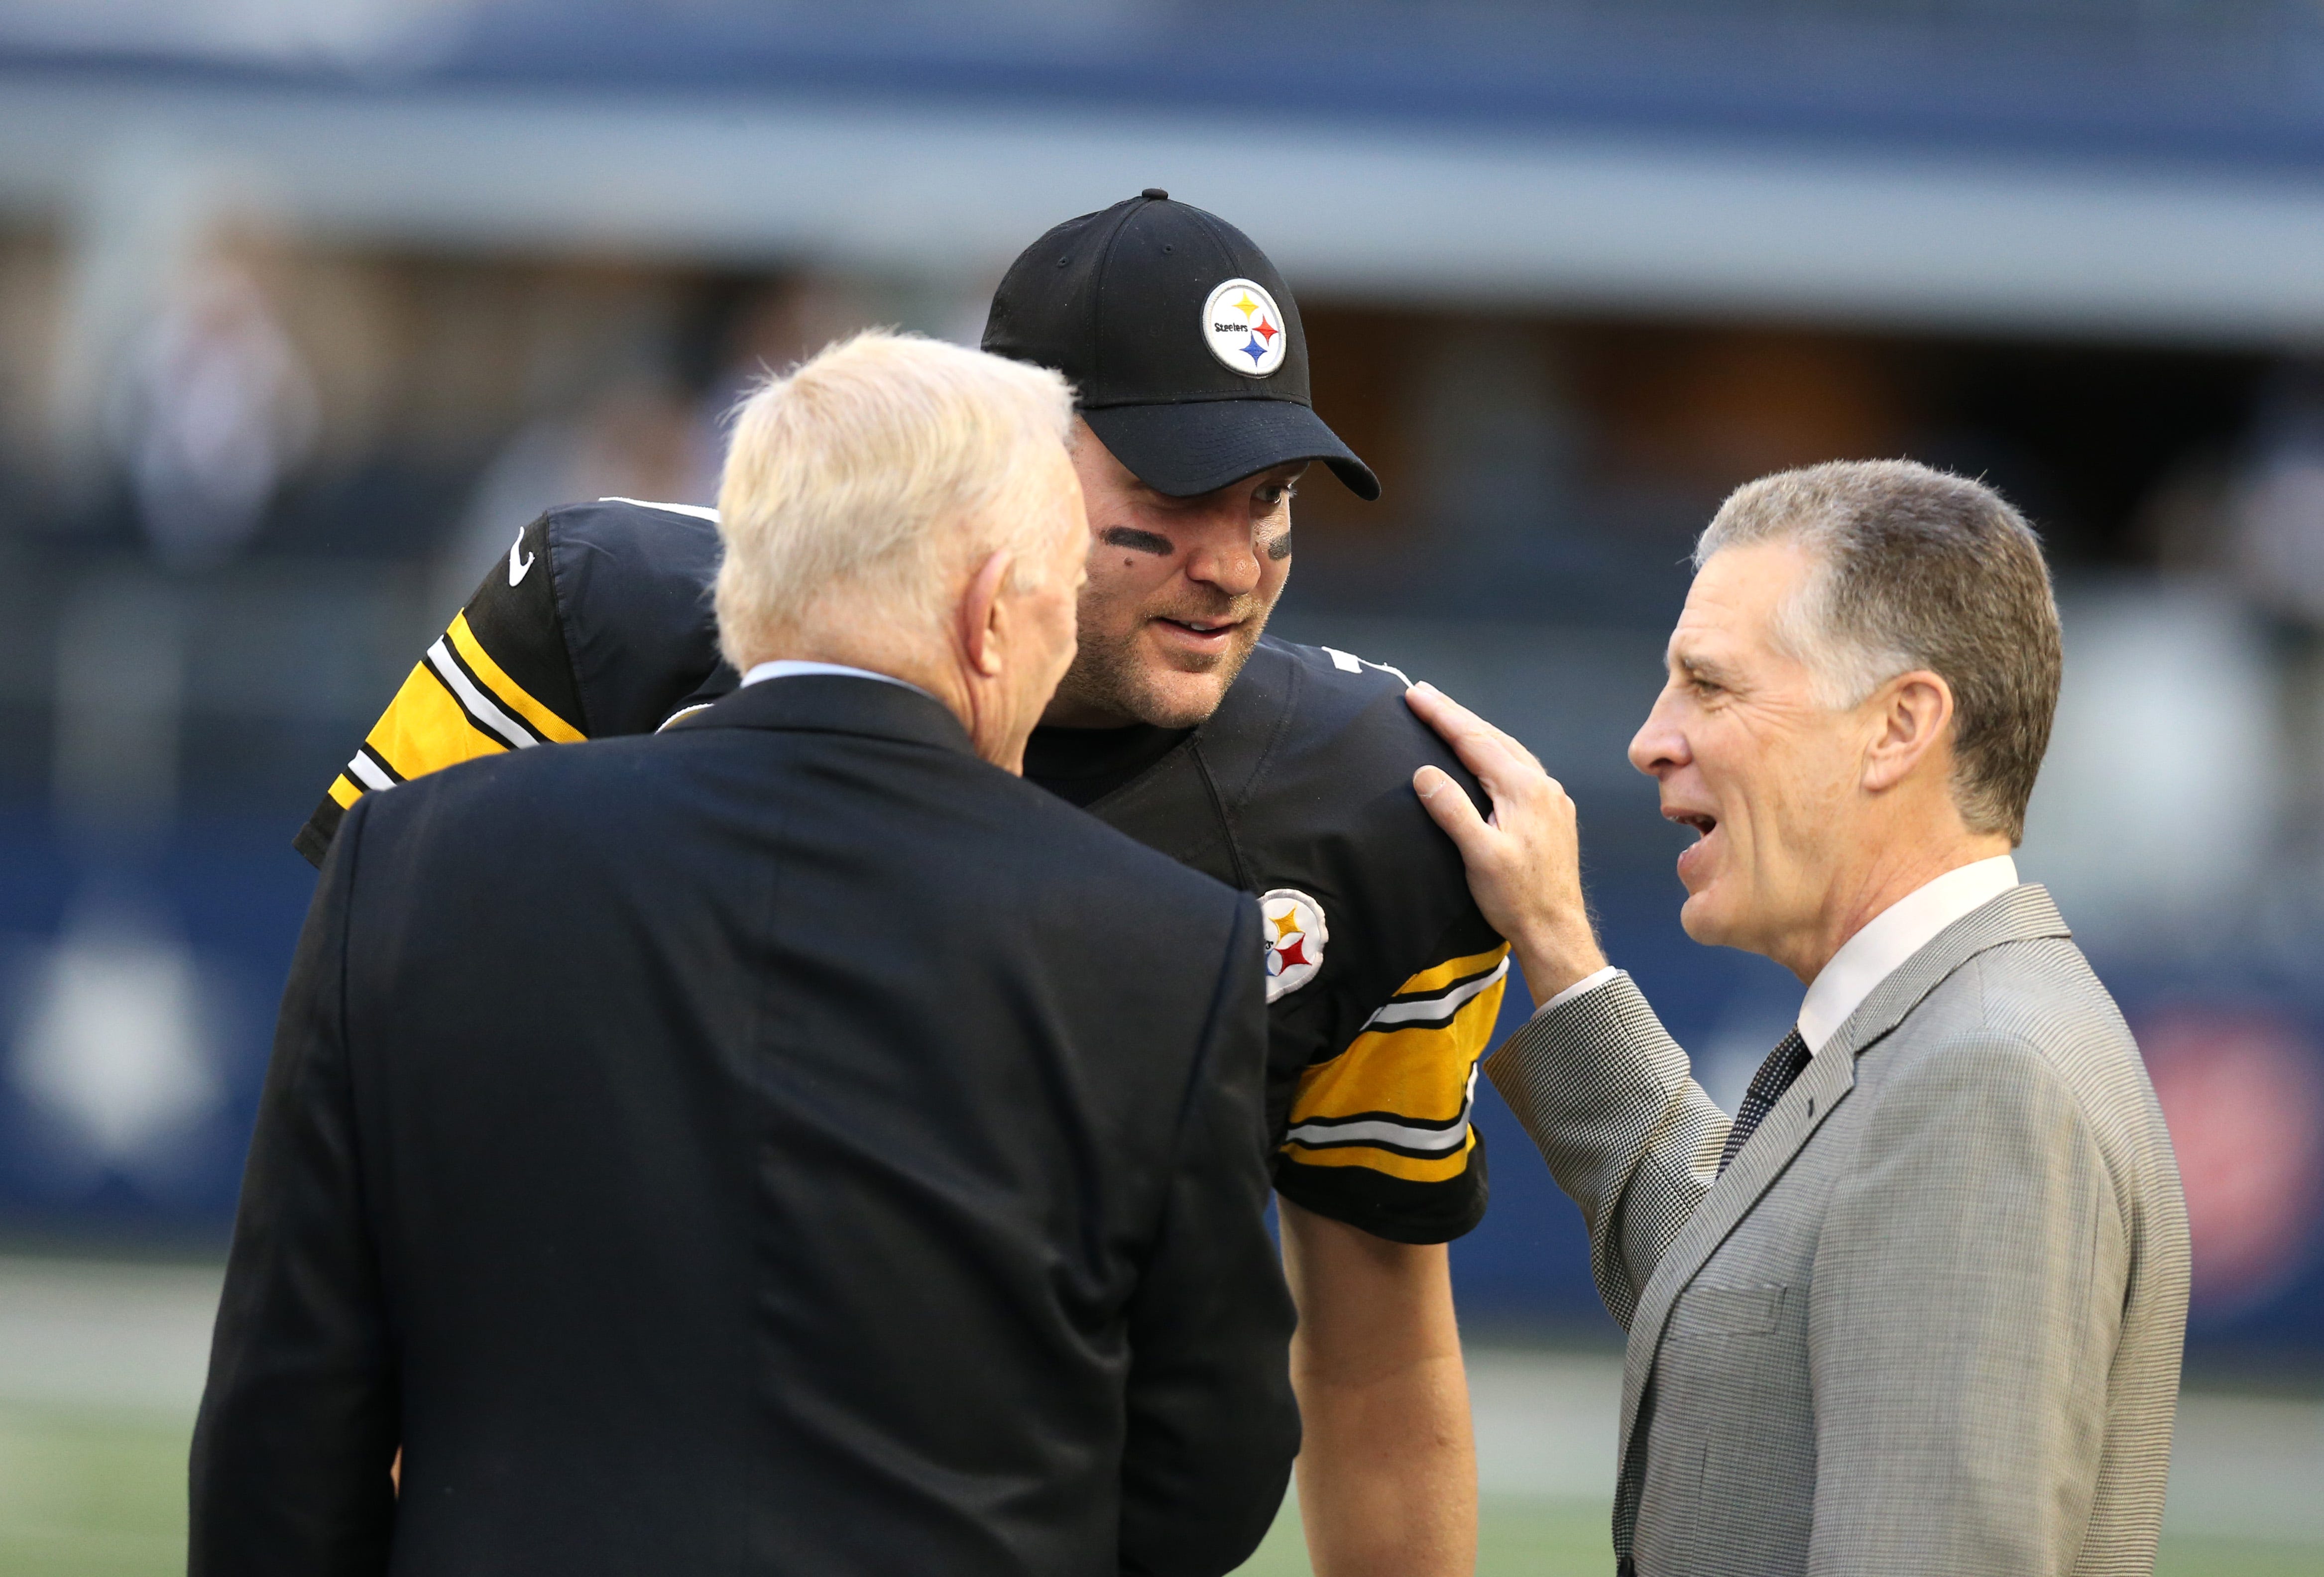 Steelers owner Dan Rooney II: 'We would like to have (Ben Roethlisberger) back,' but contract will be redone